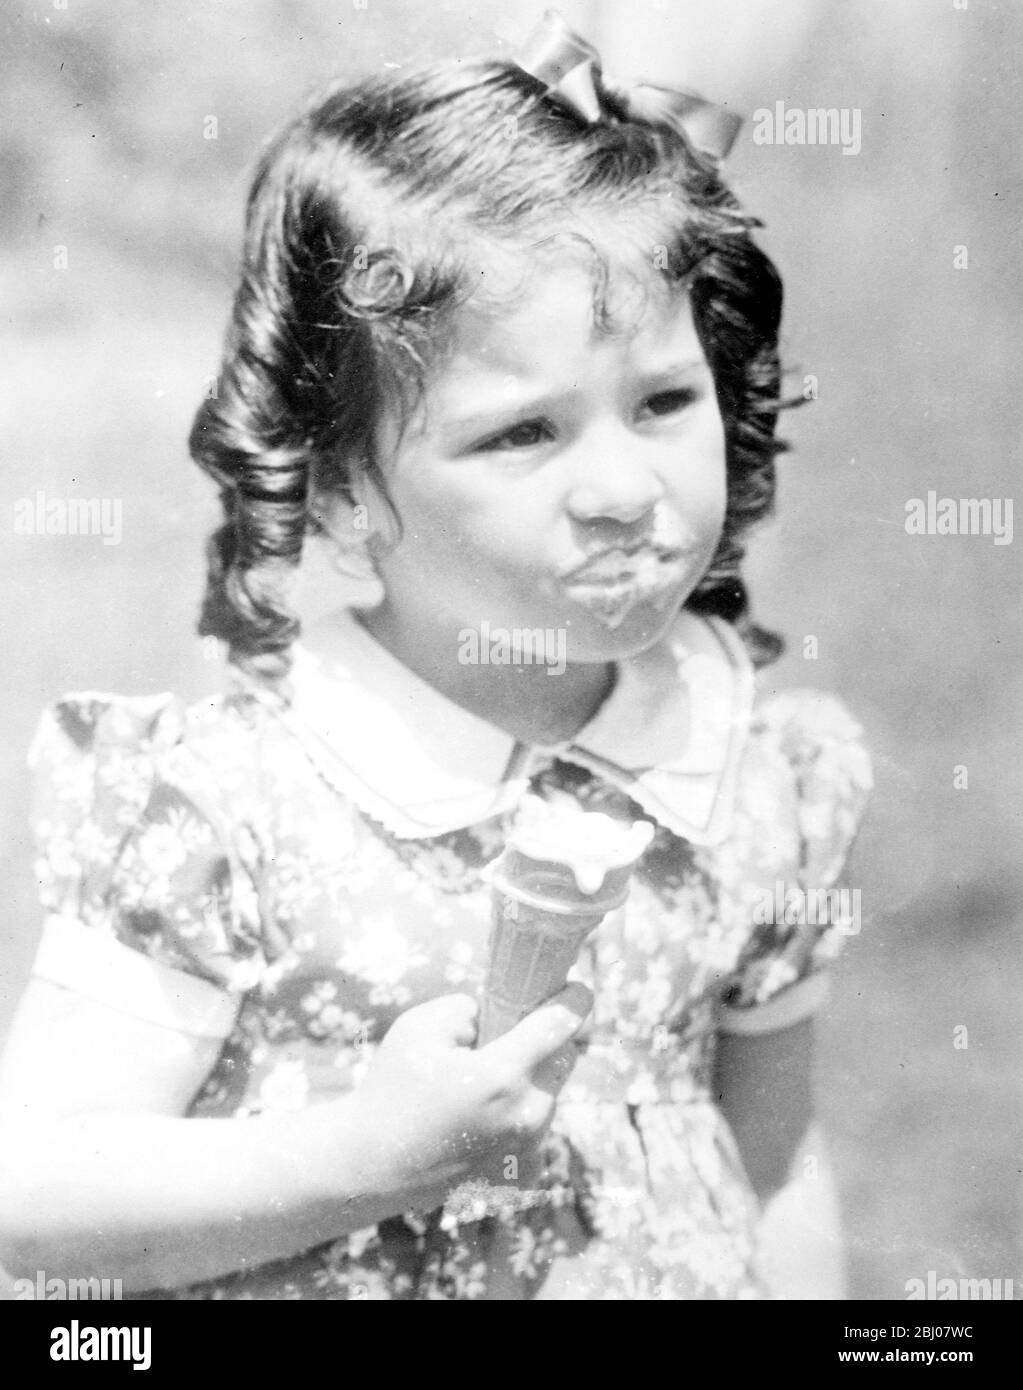 Emilie takes a big bite. - Emilie Dionne, cream liberally decorating her mouth, shows that she believes in taking a big bite when allowed the rare taste of an ice cream cornet. - The Dionne quintuplets were given ice cream for the first time at their fourth birthday celebrations. - 5 July 1938 Stock Photo